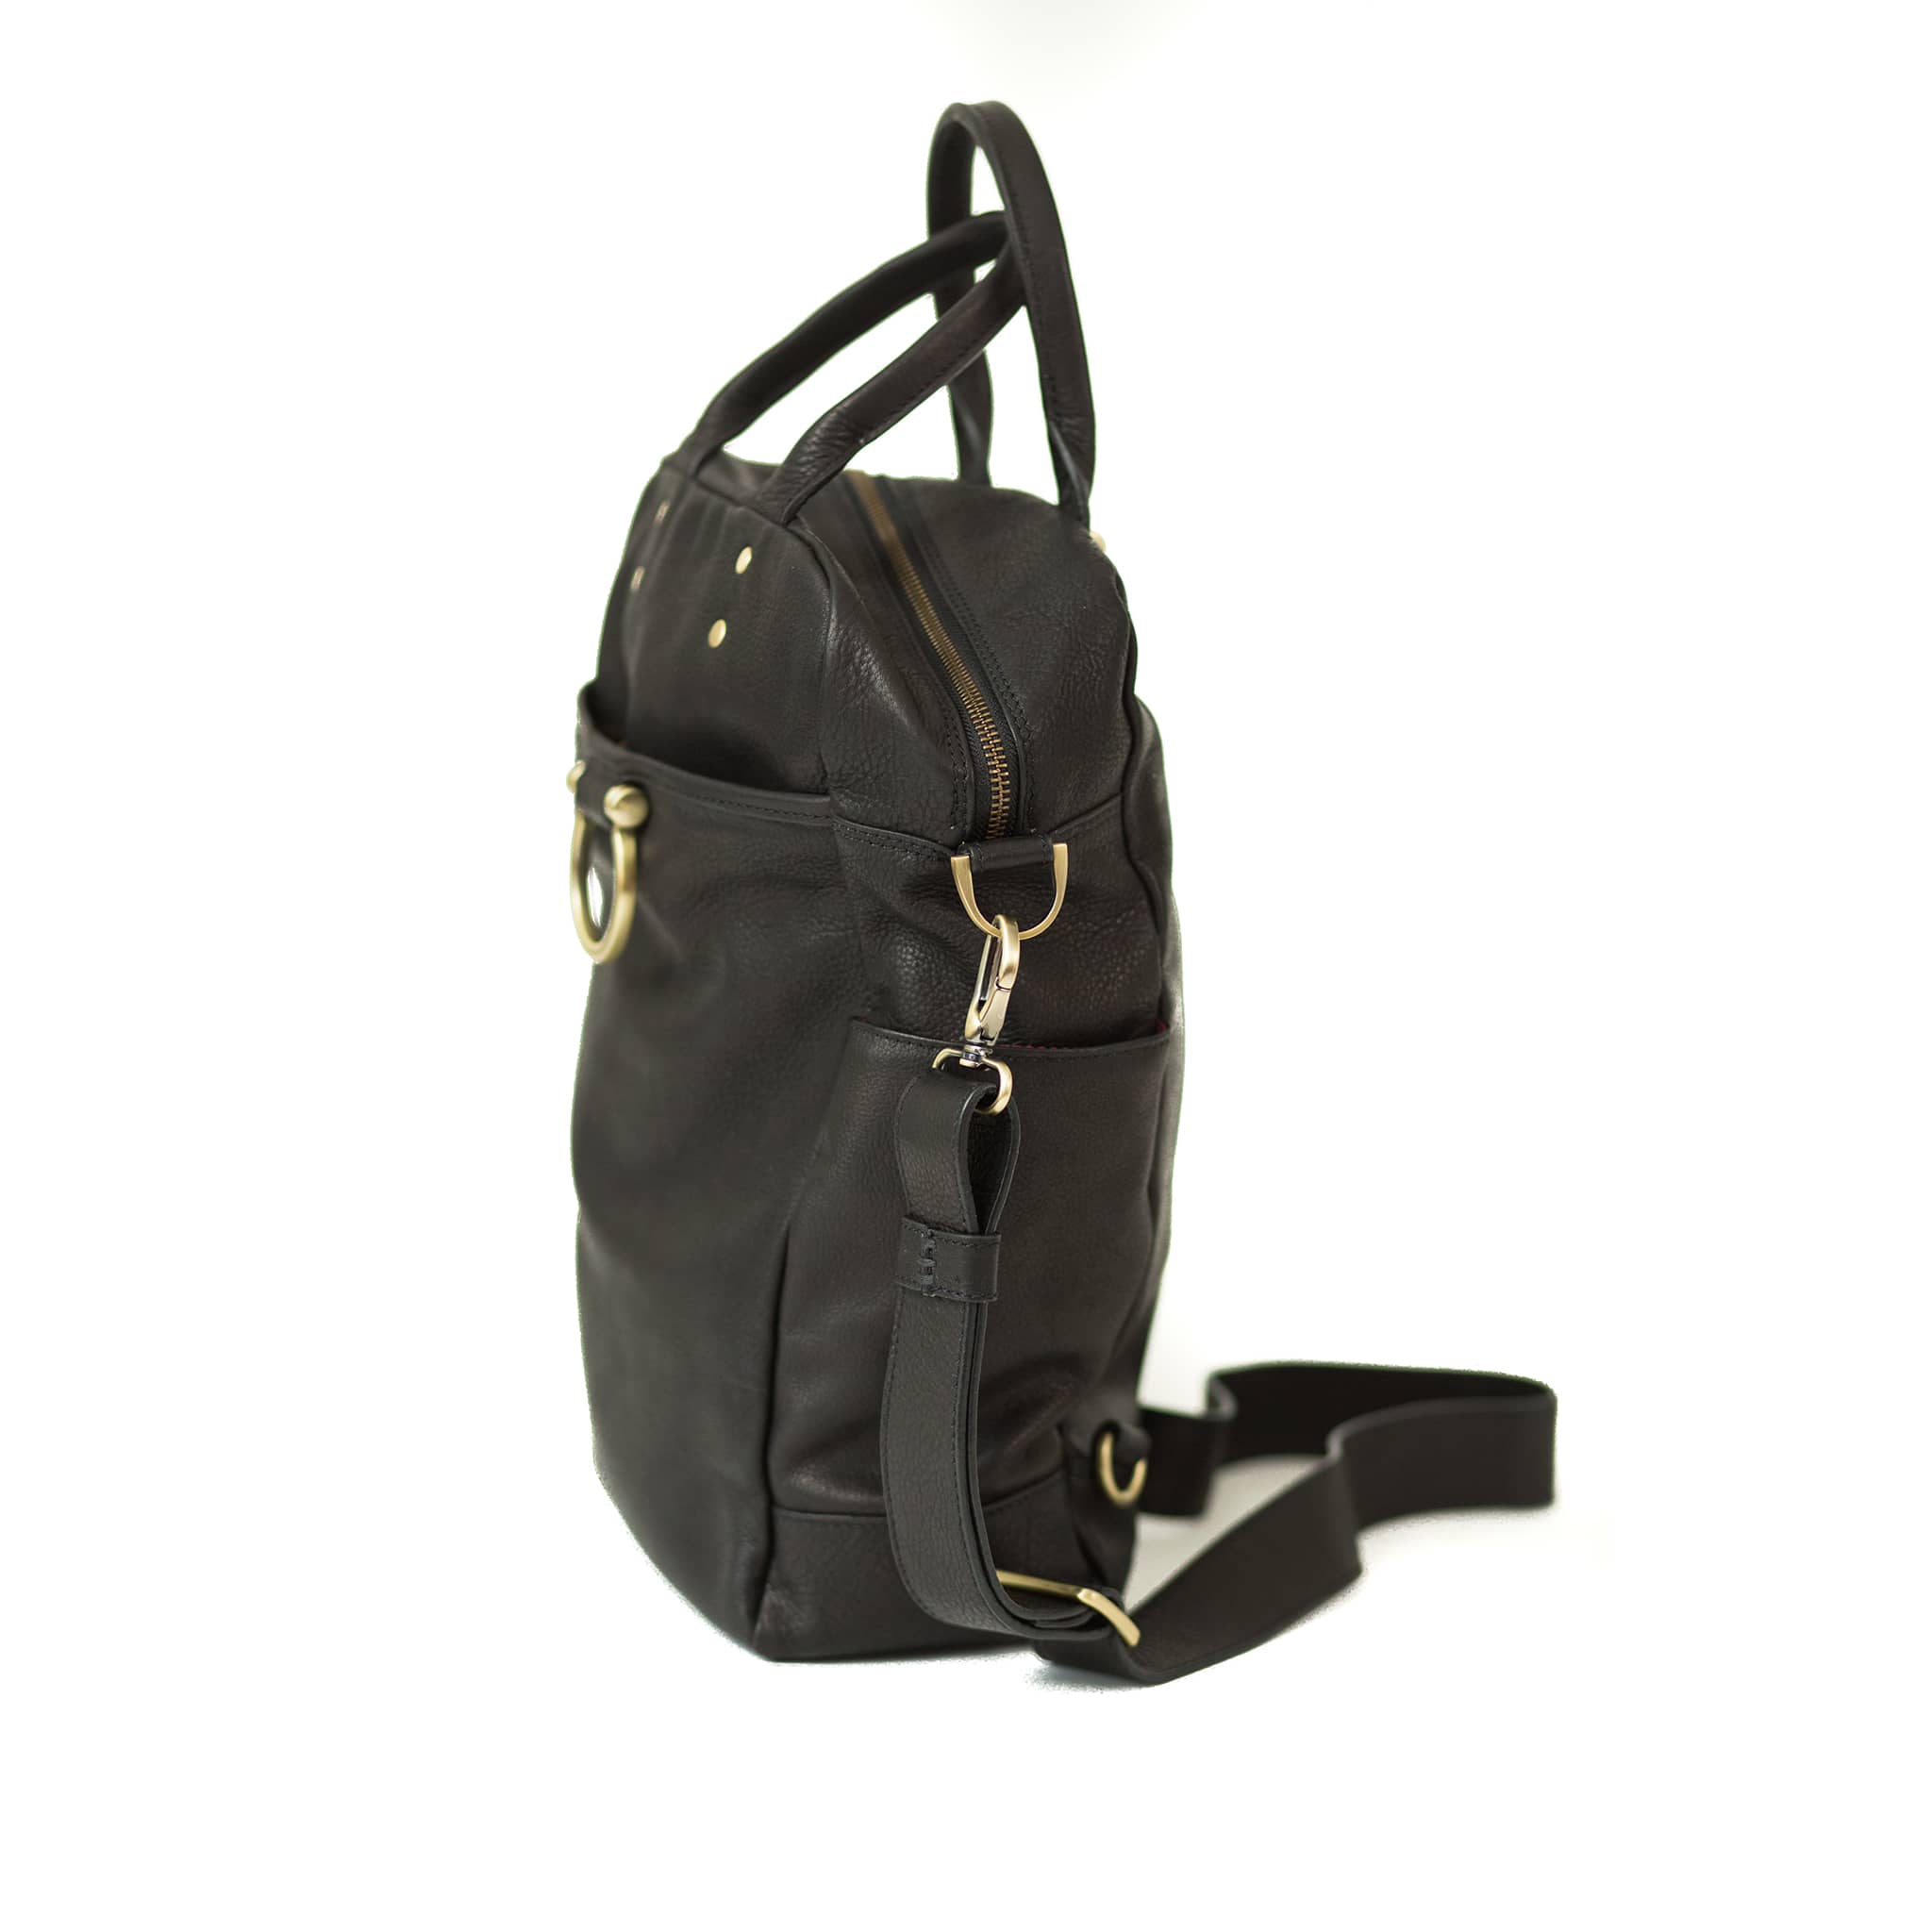 The Rodica leather crossbody bag in black raw leather has convenient exterior pockets for organization.